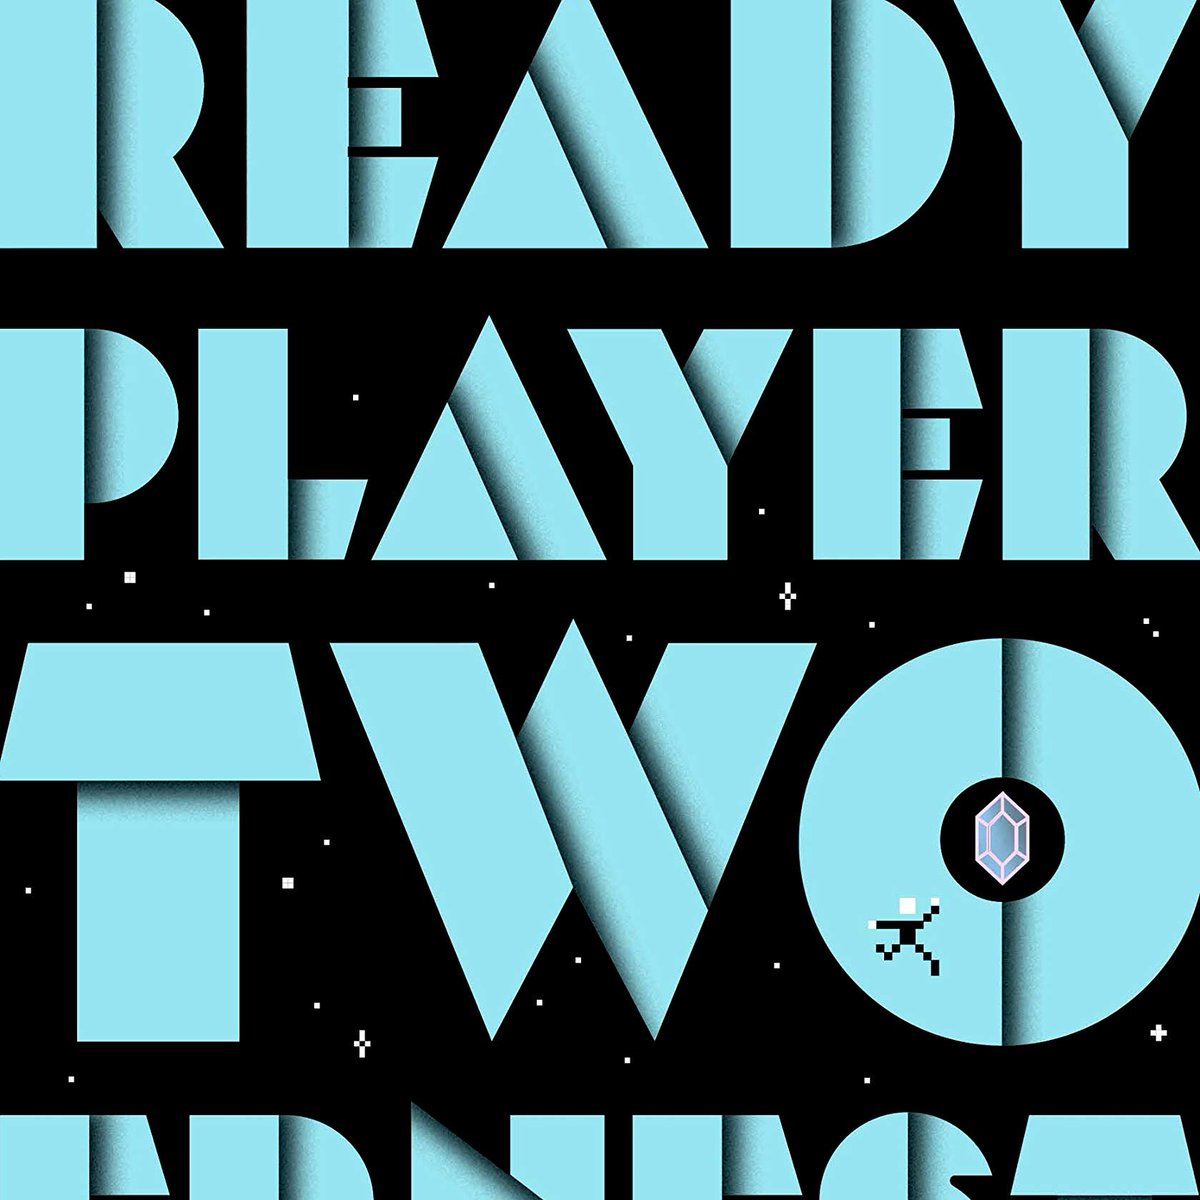 2 of #yearofbooks Ready Player Two by Ernest Cline. The 1st is a favourite (only English book in a Lyon Air BnB) but this is unfortunately not quite as good. The memes it plays to seem more forced and the story somehow sillier. BUT, still a fun and unadulterated hit of nostalgia. https://t.co/bKt6ZJCzVq